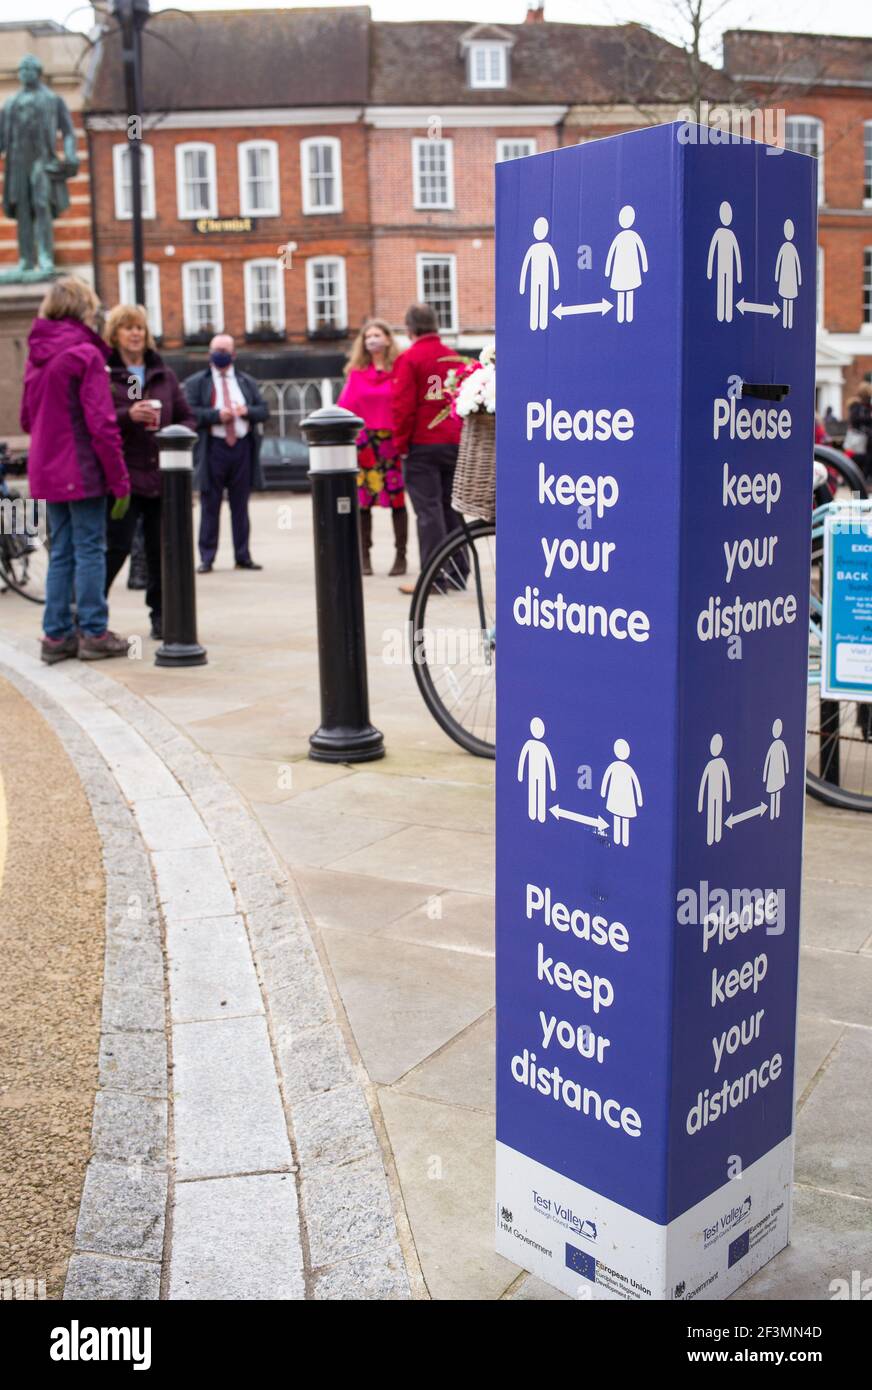 Social distancing keep your distance signs in the market town of Romsey Hampshire England and people meeting for coffee in the town square. Stock Photo